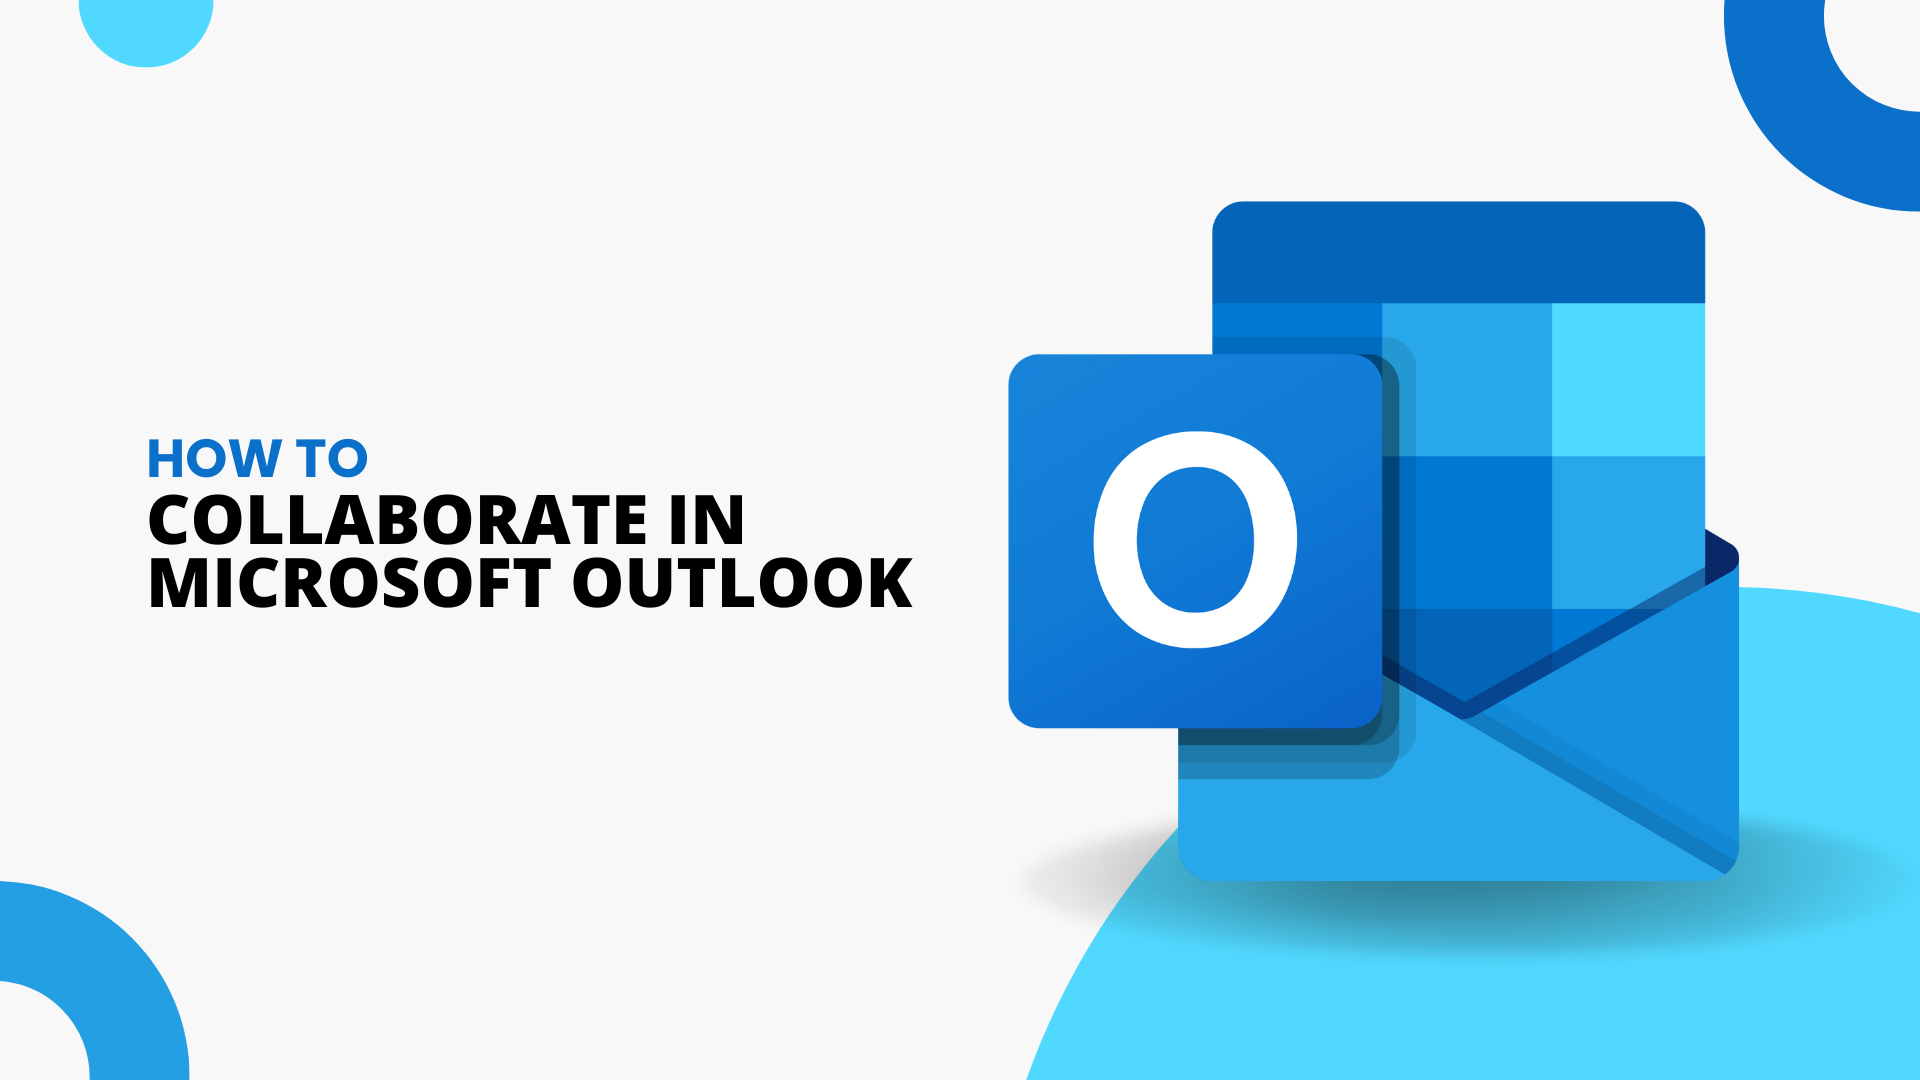 Collaborate in Microsoft Outlook